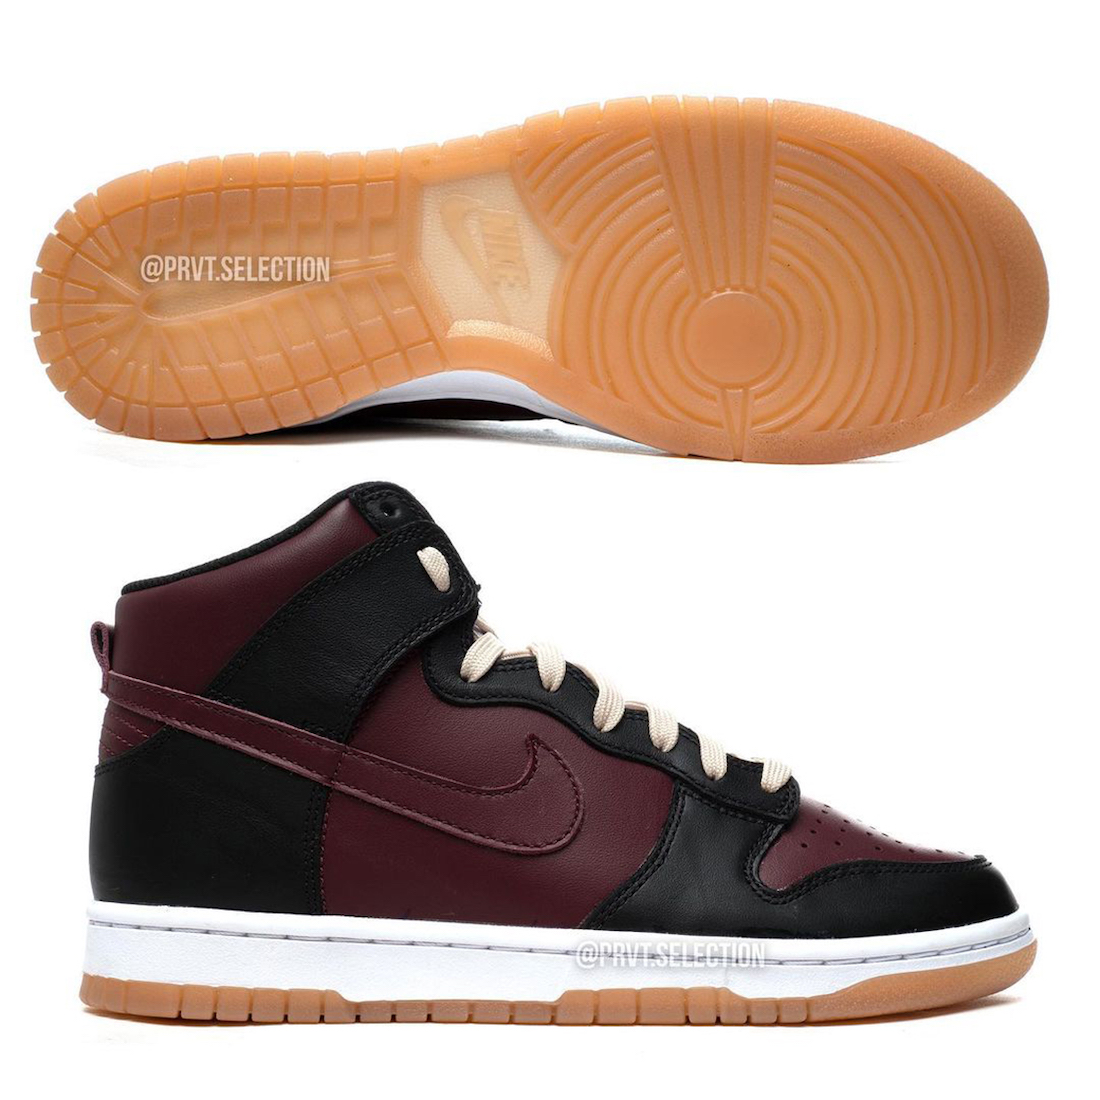 Nike Dunk High Redwood Release Date